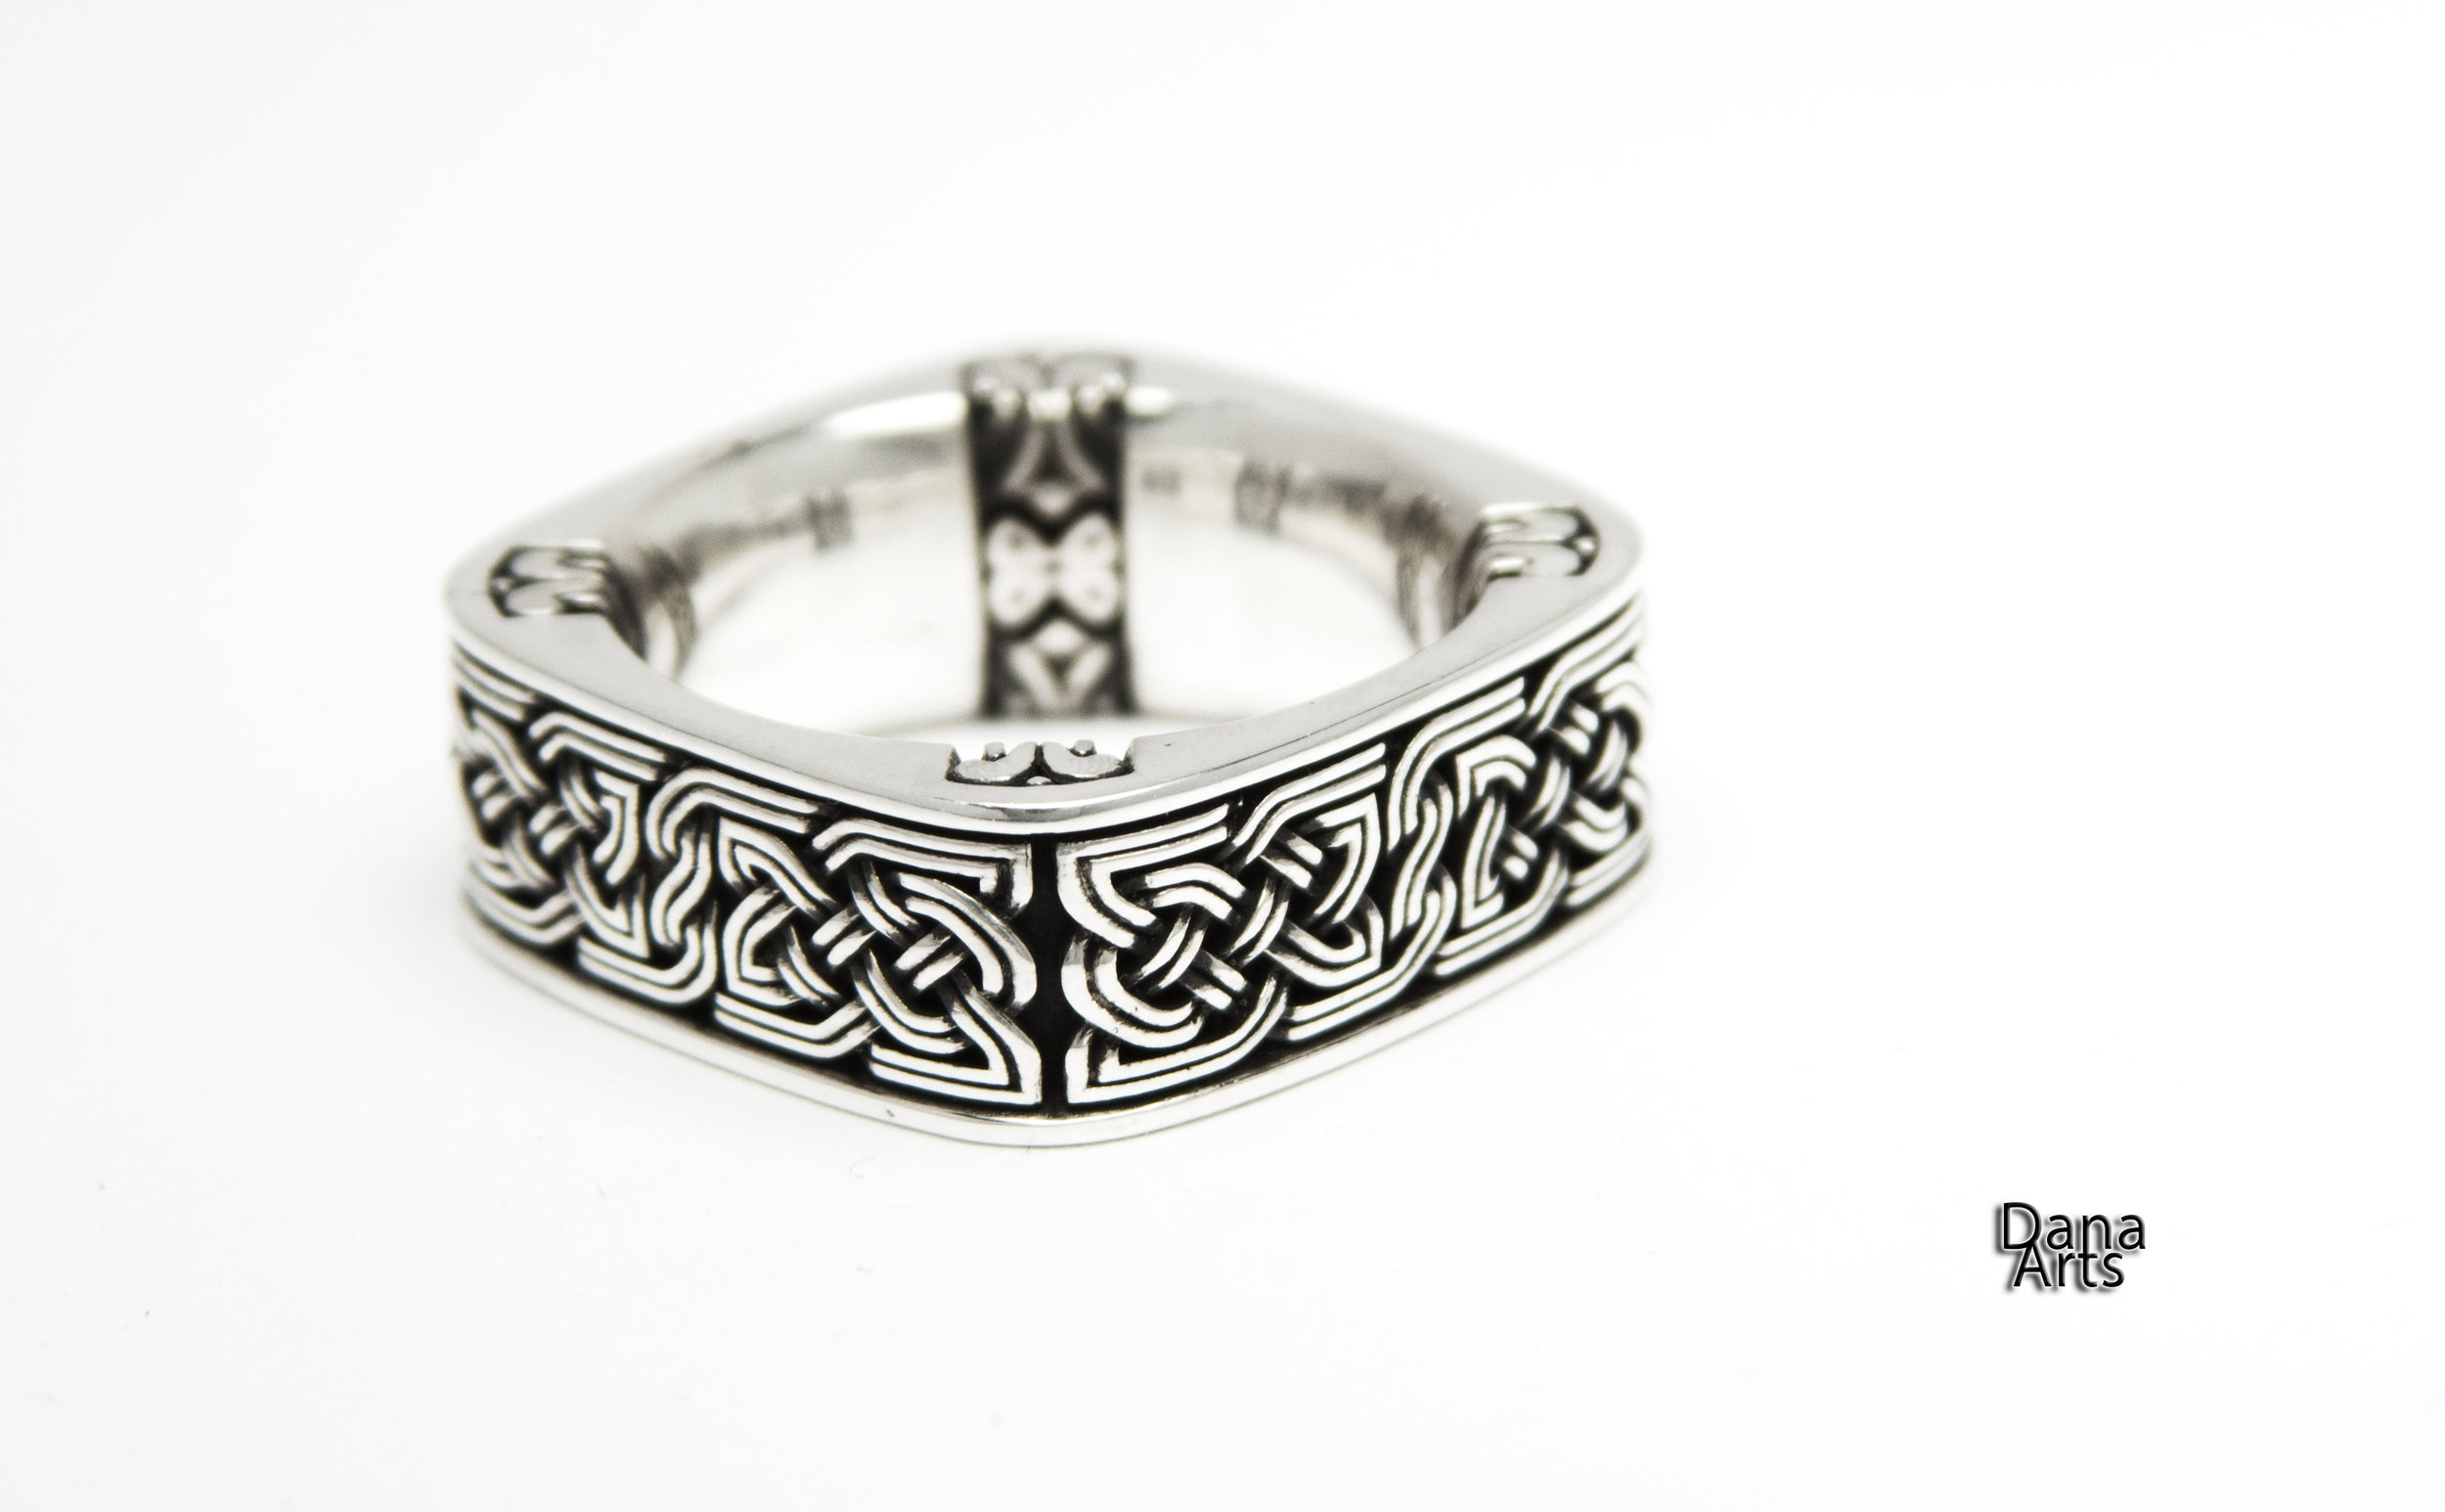 Square Celtic Knot ring with corner patterns in sterling silver — Dana Arts